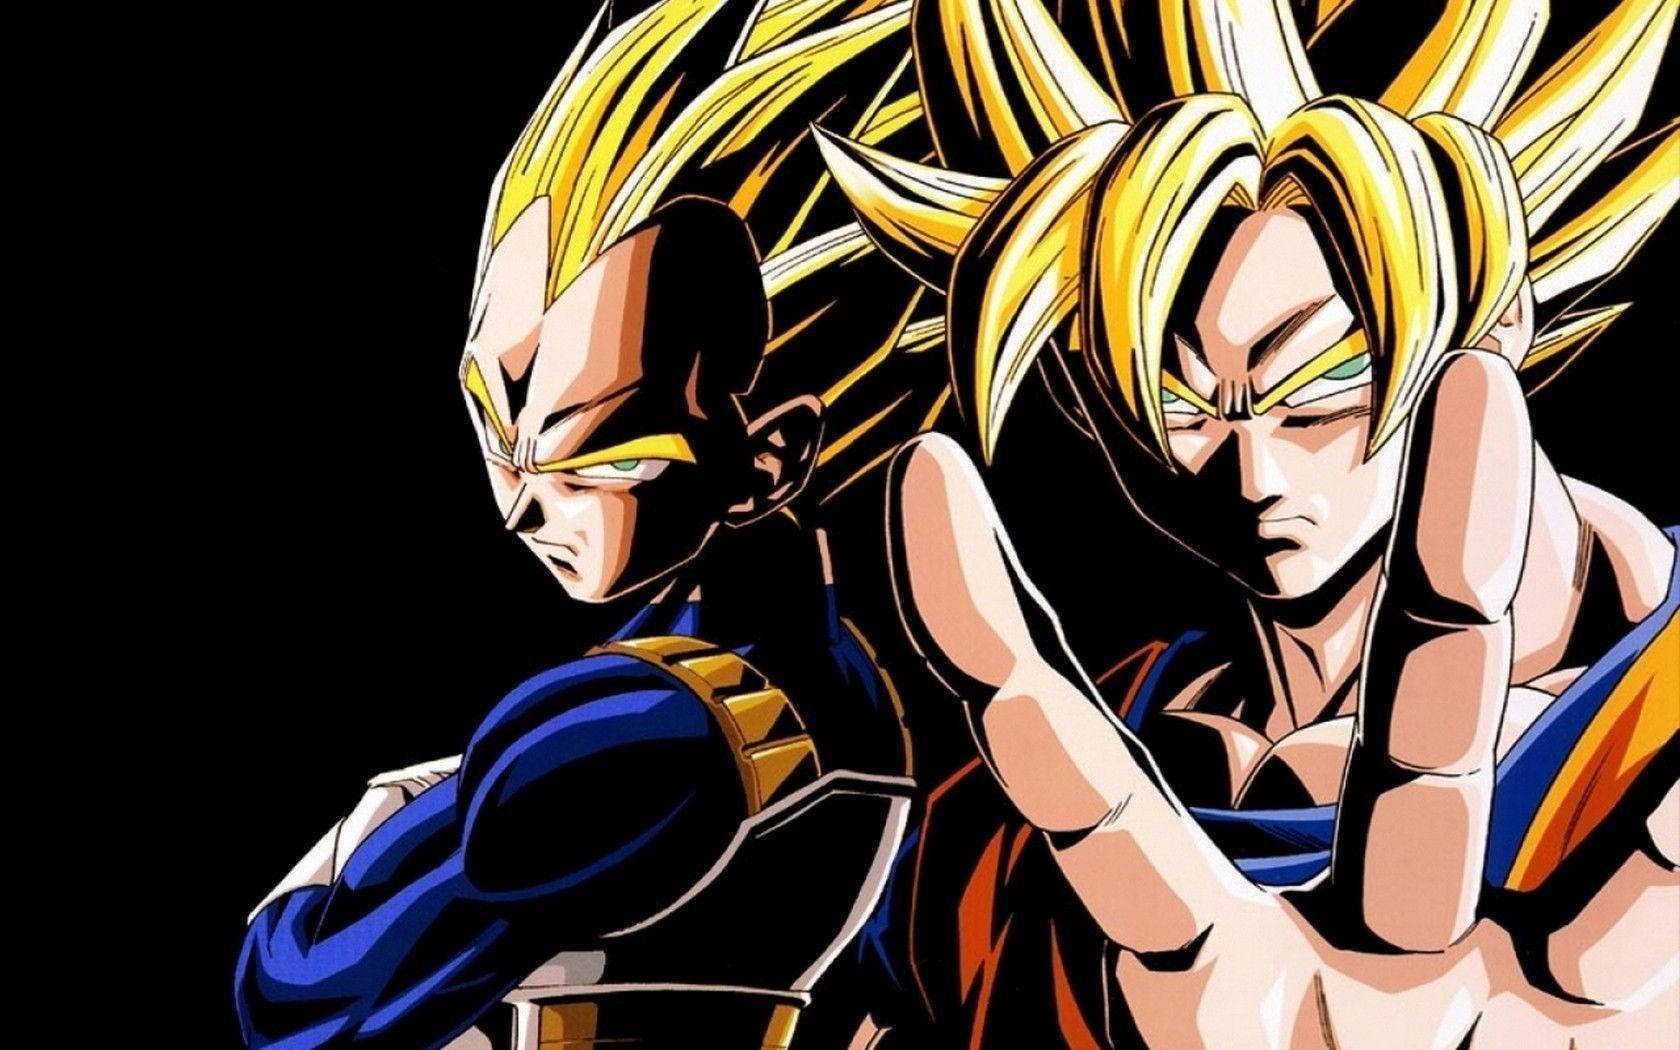 Explore The Adventure With Cool Dragon Ball Z Wallpaper